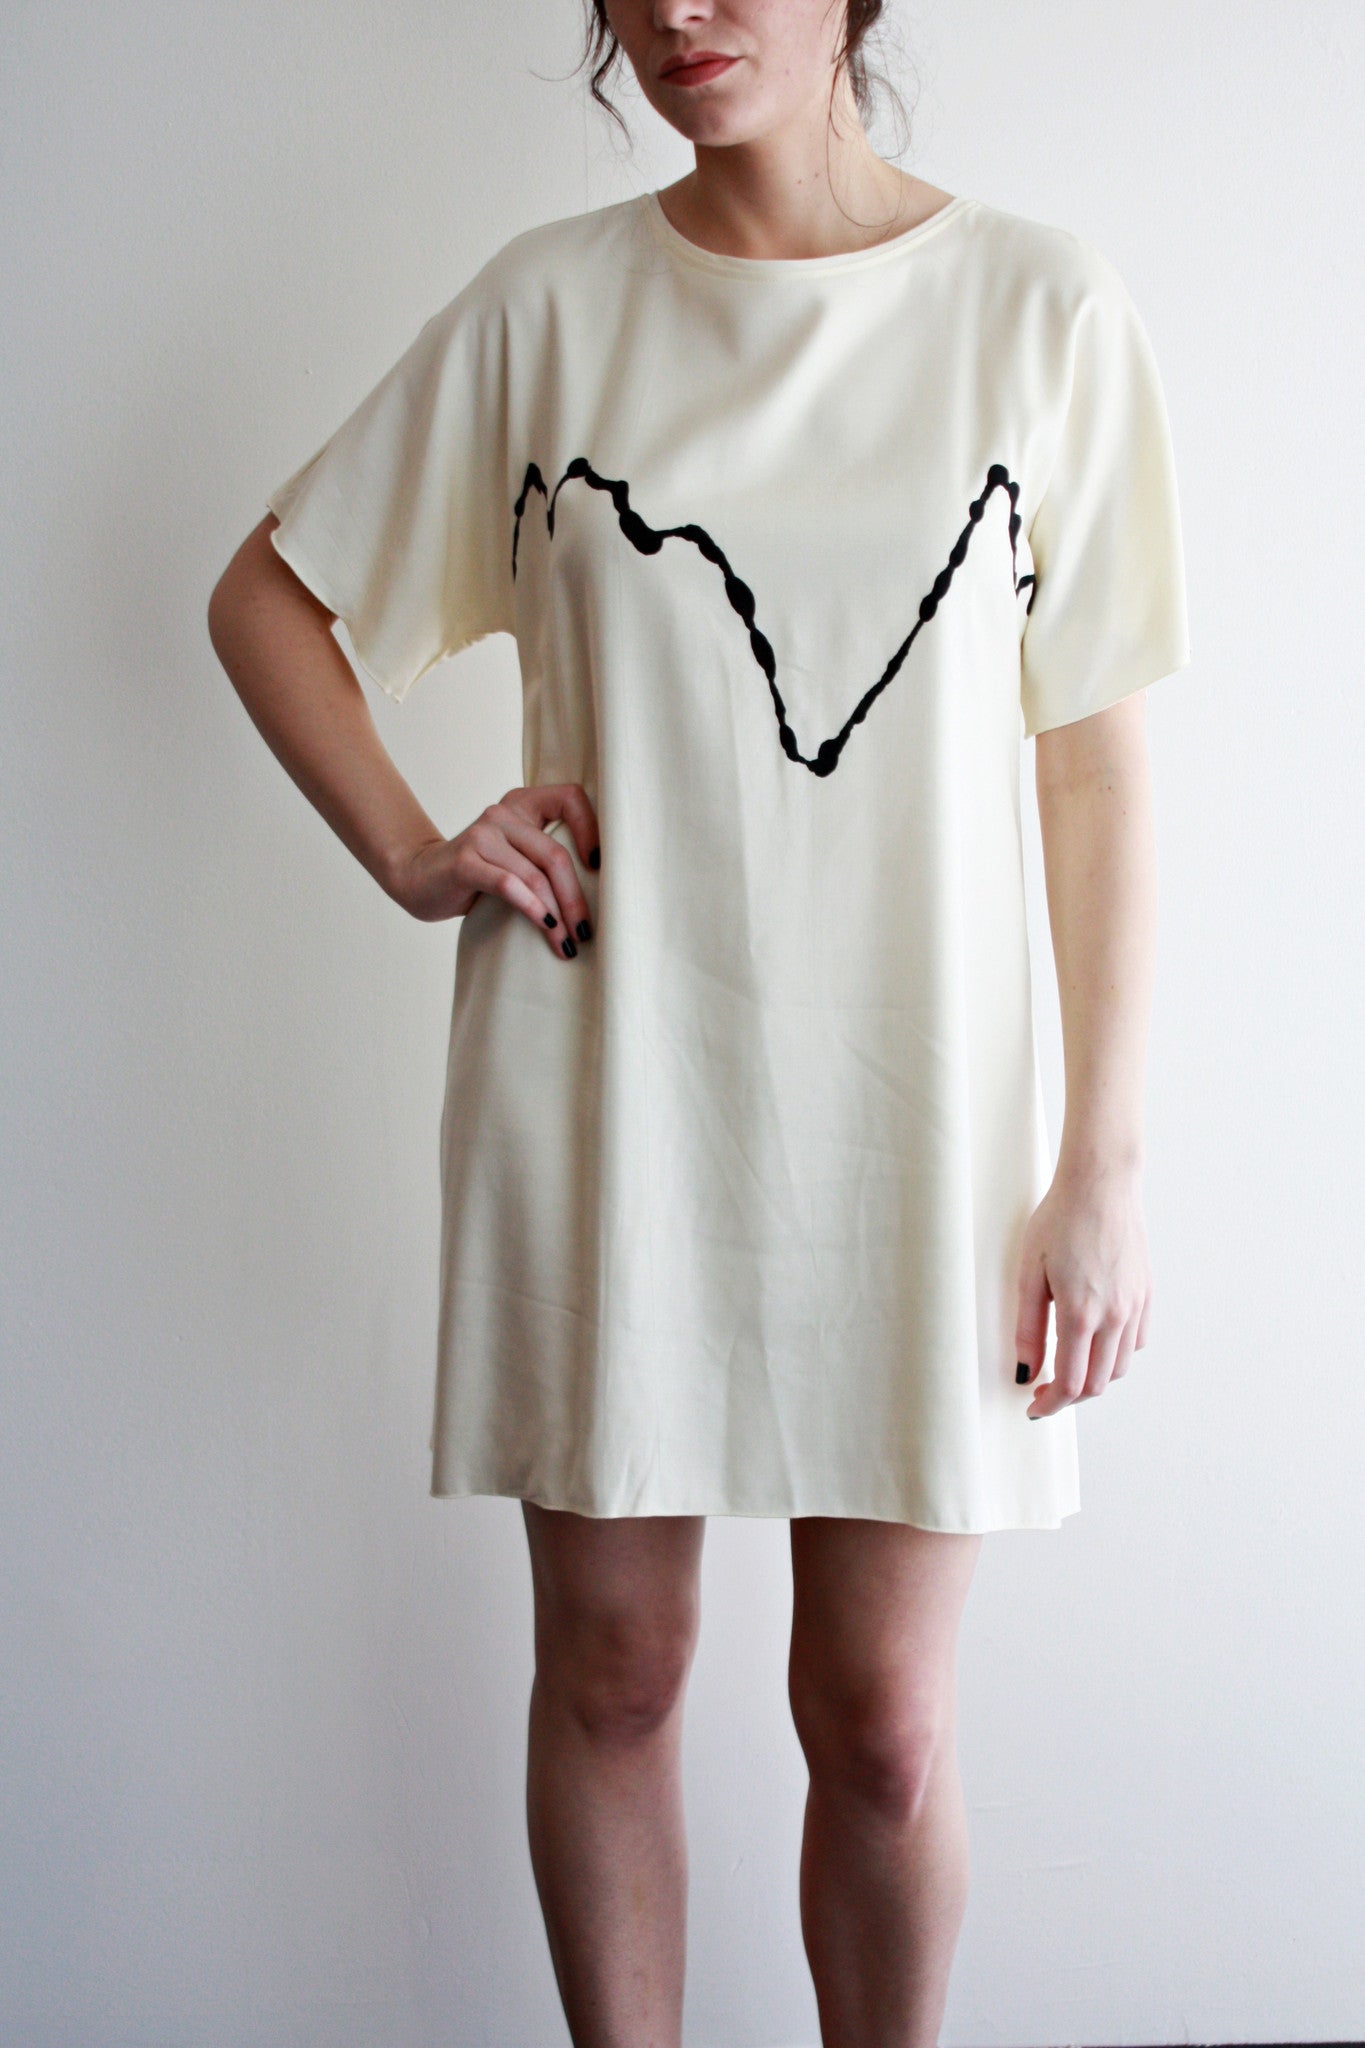 Torn Breast Cleavage Graphic T-Shirt Dress for Sale by MarkUK97